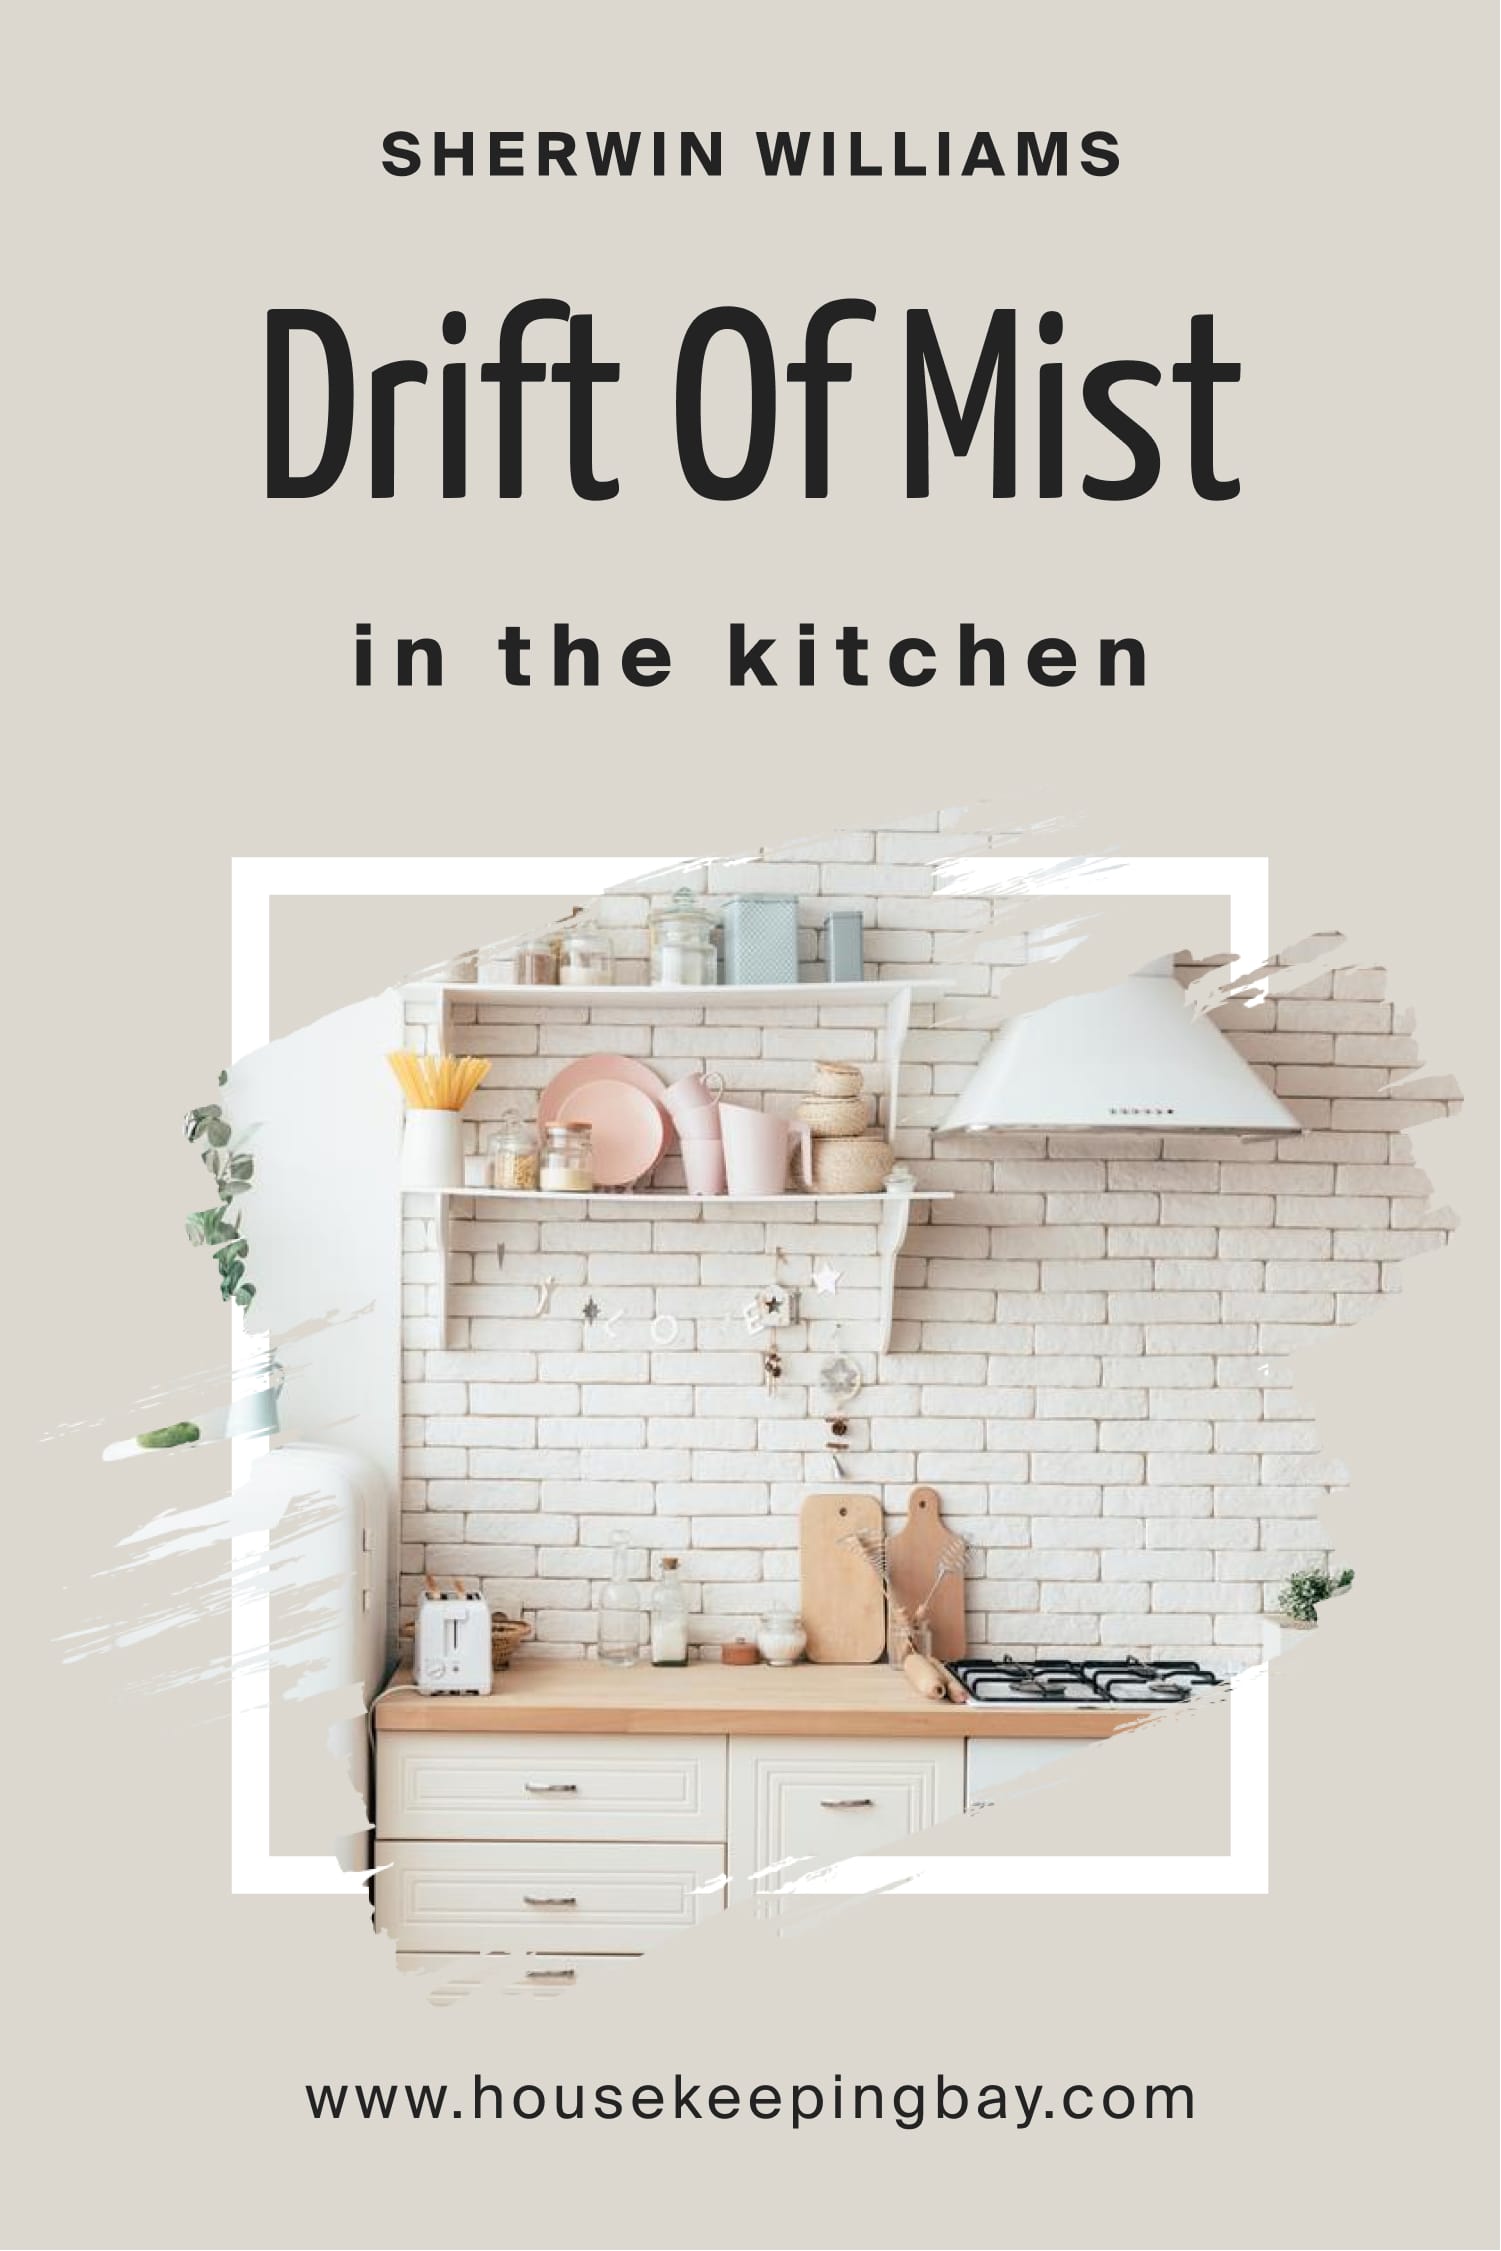 Sherwin Williams. Drift Of Mist For the kitchen